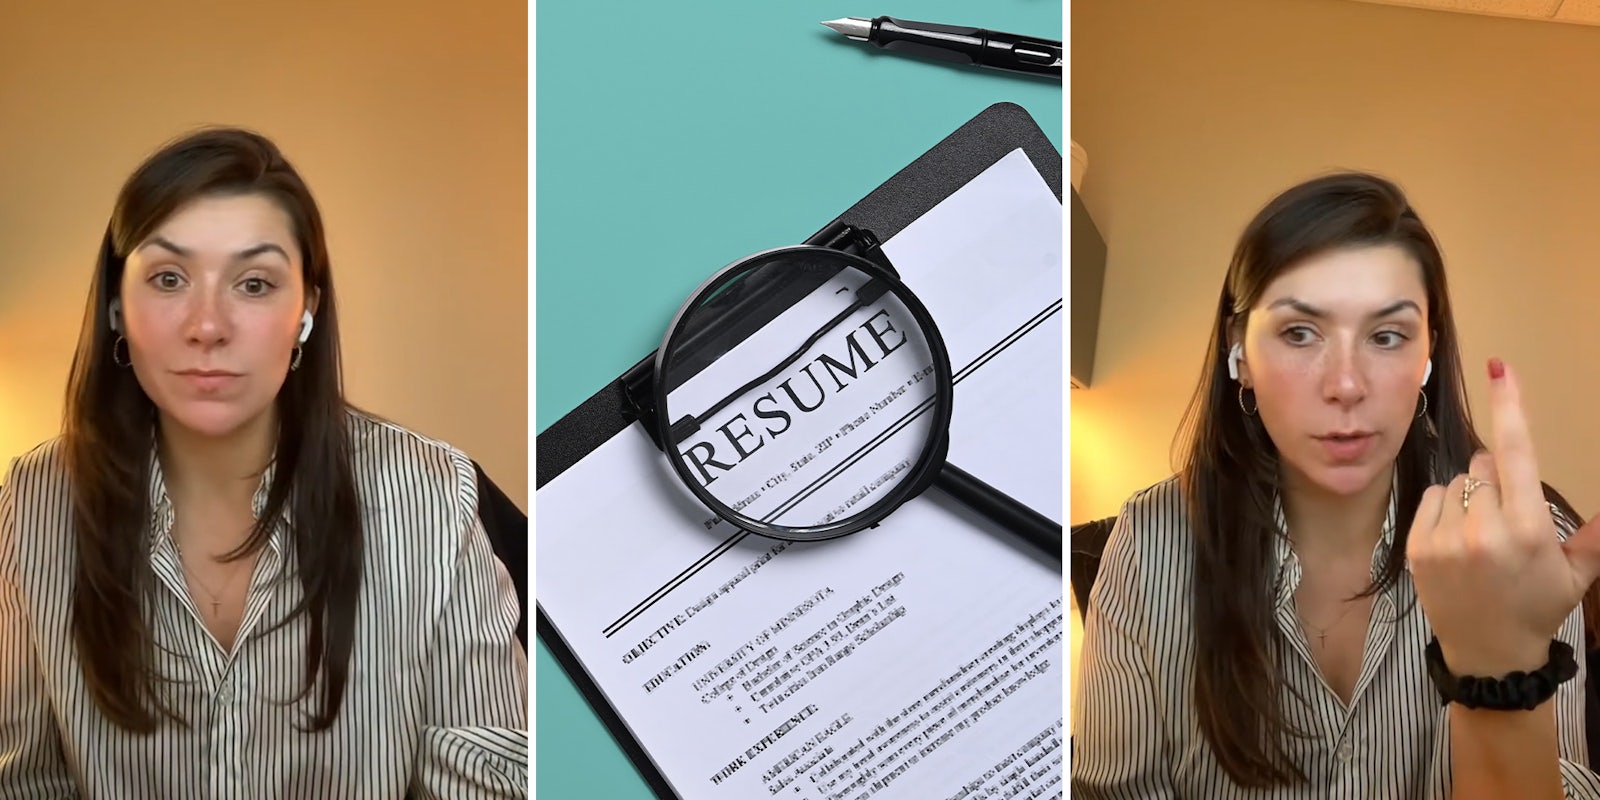 Career experts says you should never leave specific dates on your resume. Here’s why